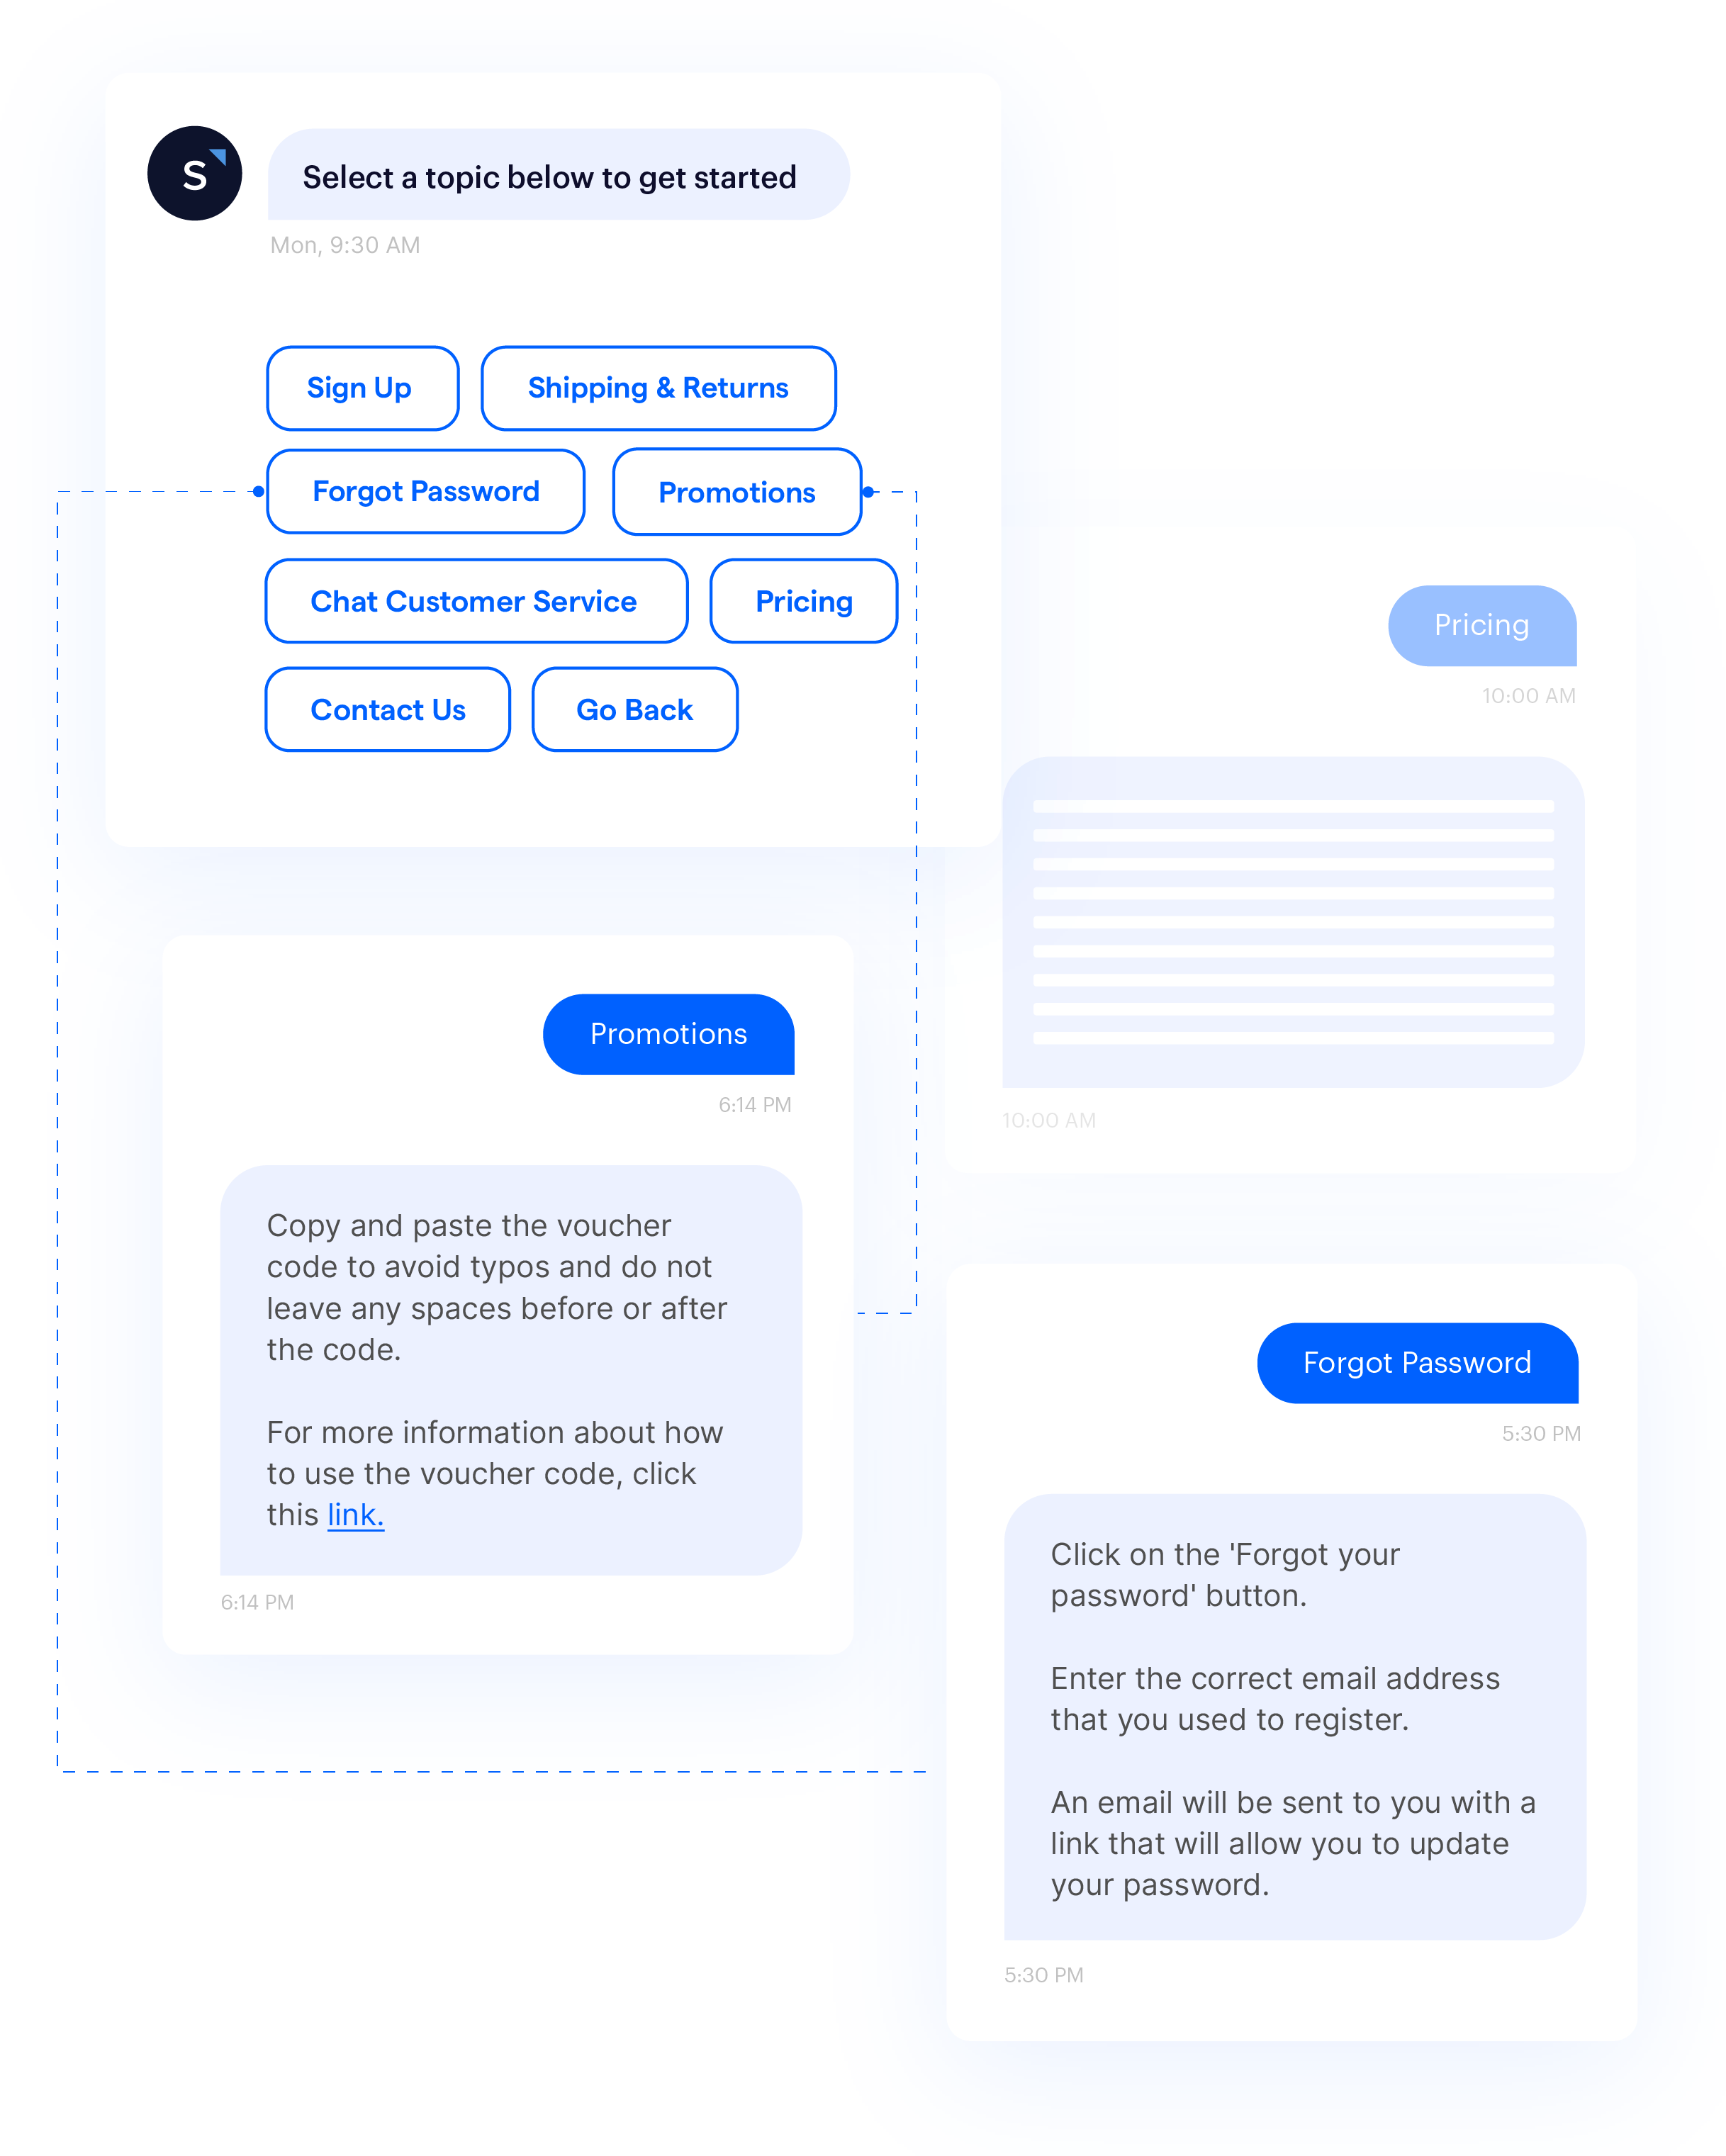 SleekFlow automation for building chatbots